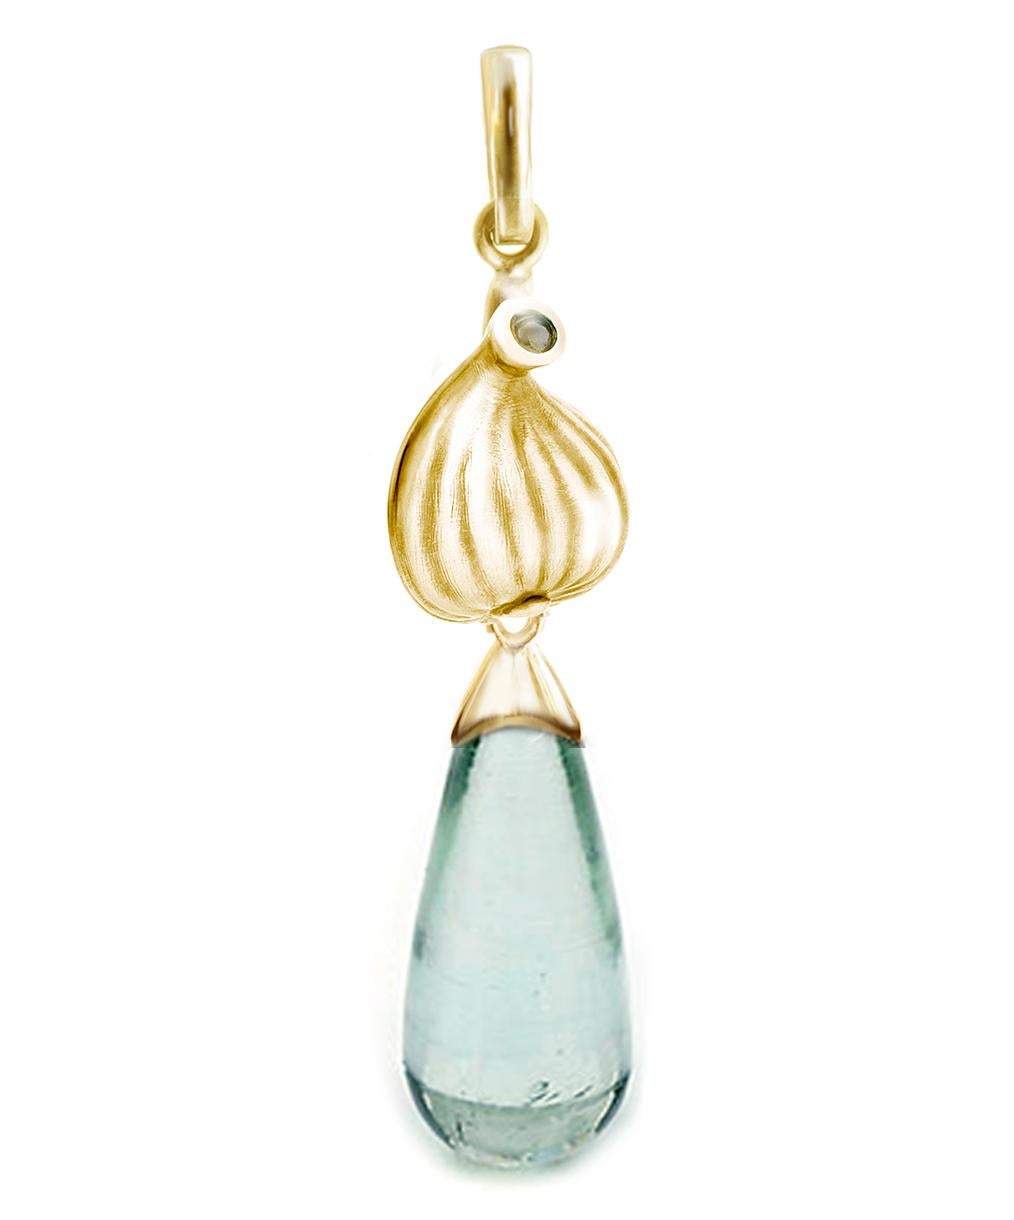 These contemporary drop earrings are made of 18 karat yellow gold with 15.5x6 mm (8.7 carats) natural light sky blue tourmalines and round diamonds. The Fig collection was featured in Vogue UA review and they are designed by the artist and oil